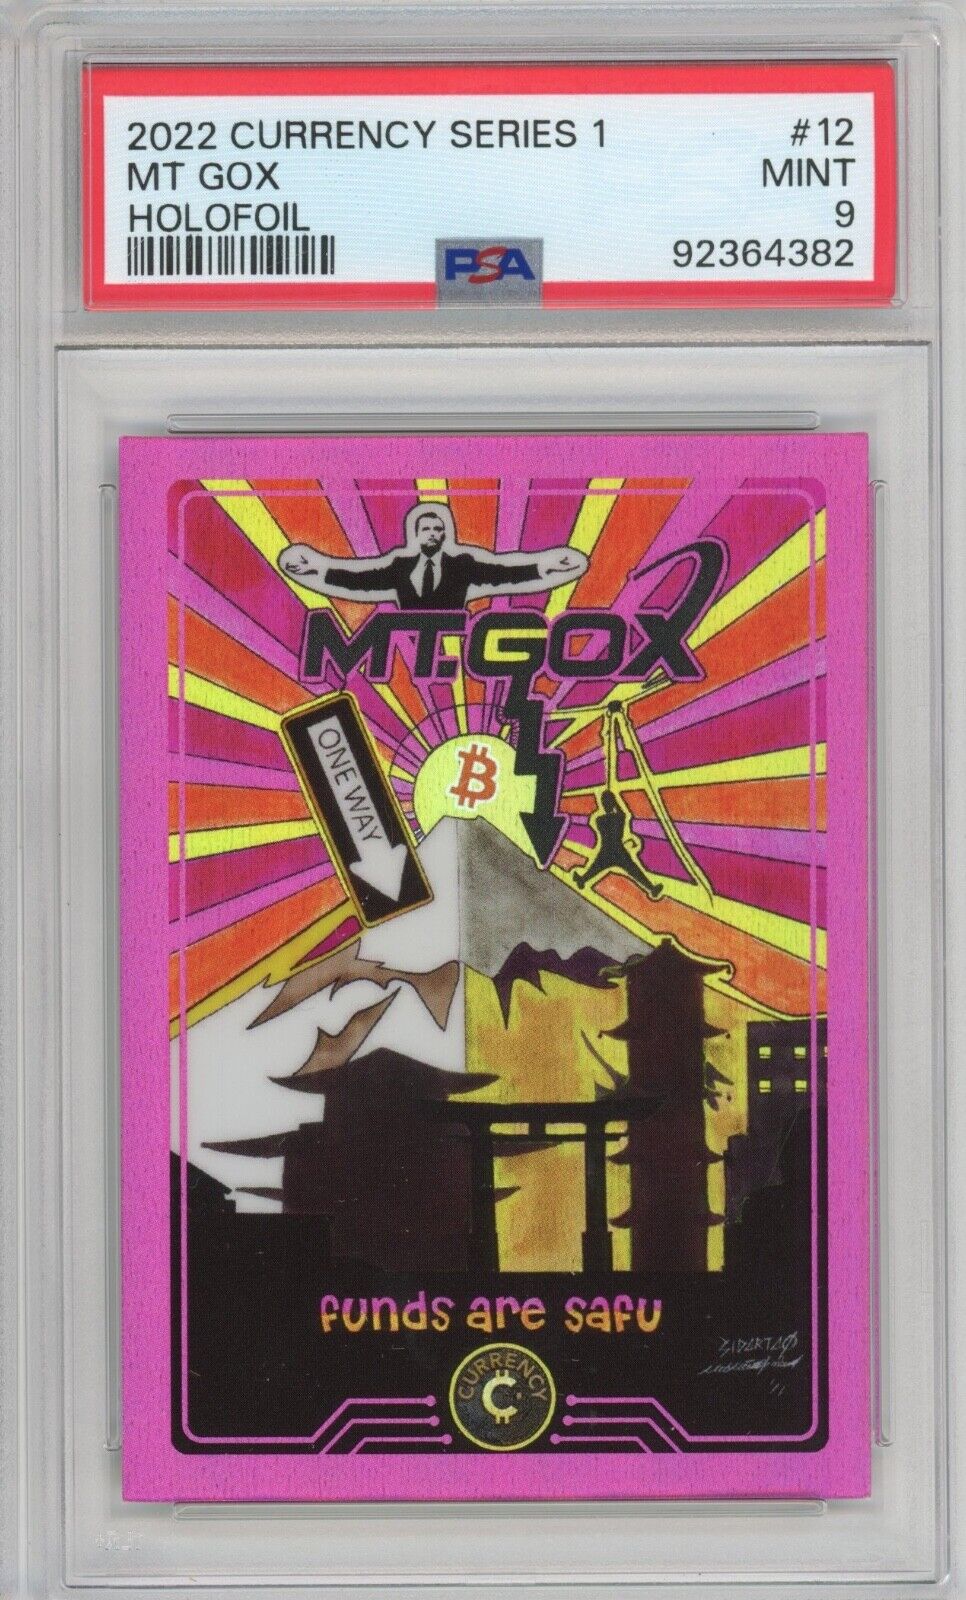 2022 Cardsmiths Currency Series 1 1st Edition #12 Mt Gox Holo Foil GRADED PSA 9